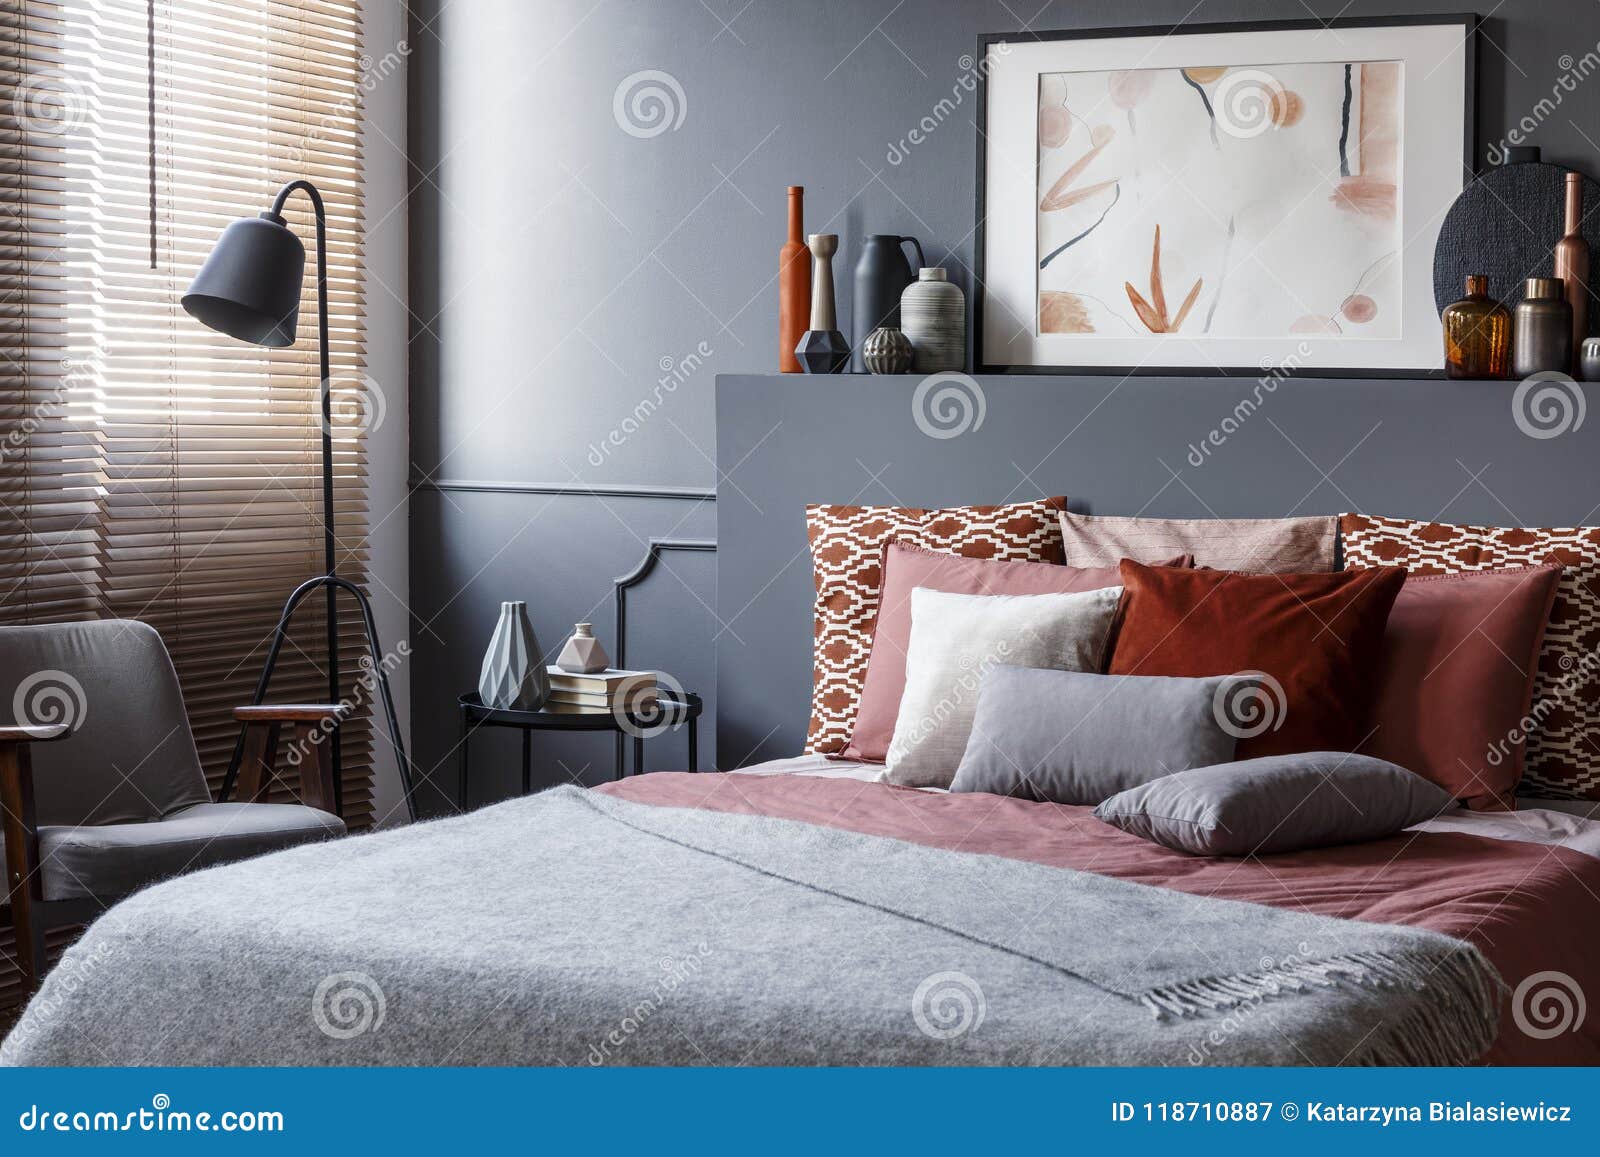 creative poster on black bedhead above cozy bed with decorative